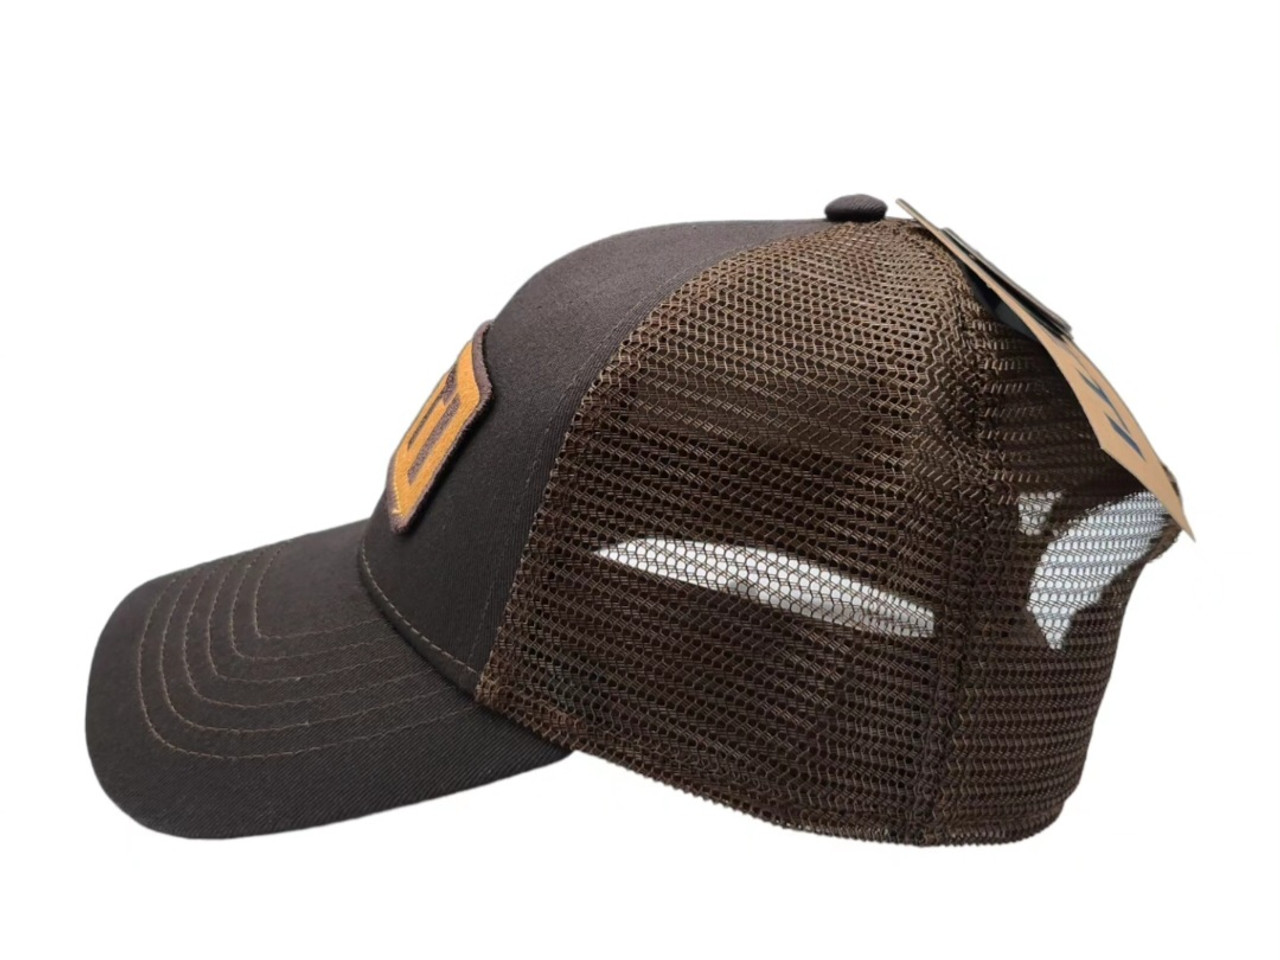 https://cdn11.bigcommerce.com/s-mkx5msl2io/images/stencil/1280x1280/products/13445/70310/LOGO-BADGE-F23-LOW-PRO-BROWN-HATS-CAP-CAP-21023006100__S_3__11264.1689699716.jpg?c=1&imbypass=on